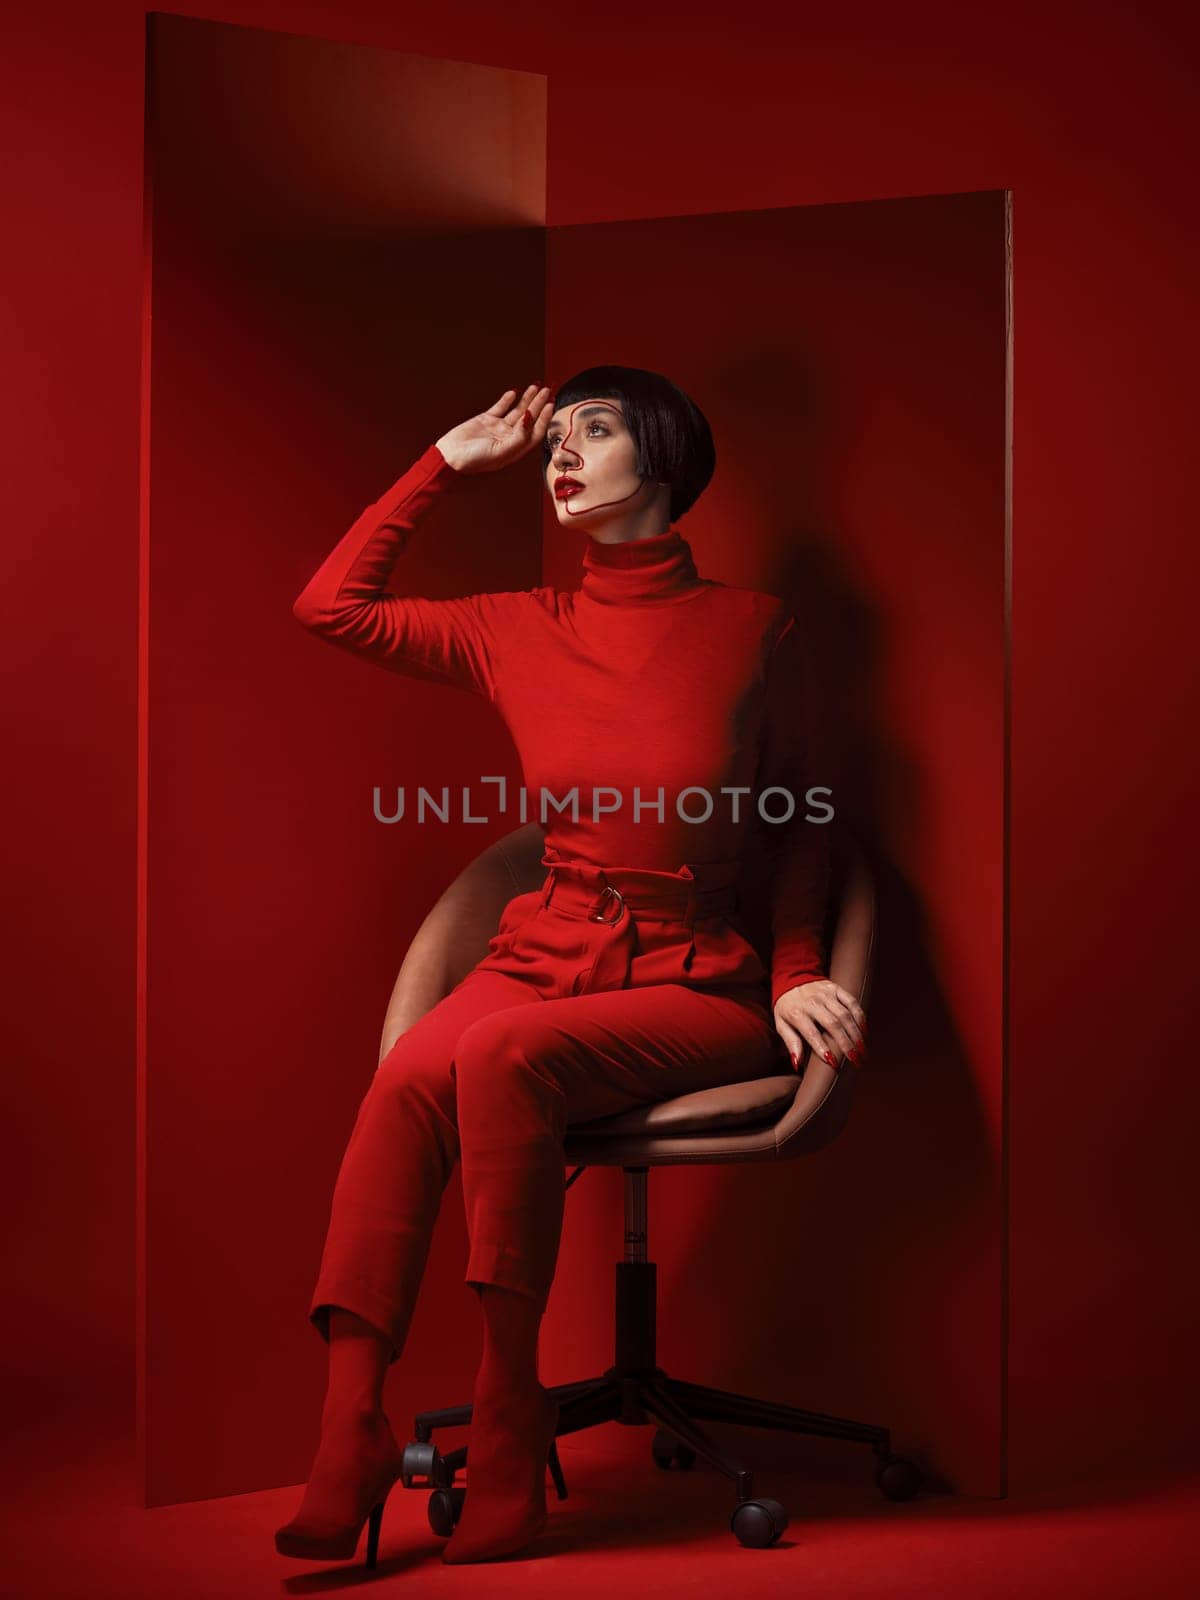 Thinking, fashion and a model woman on red background in studio for elegant, chic or trendy style. Aesthetic, art and beauty with an edgy person in unique clothes suit, makeup and cosmetics on chair.